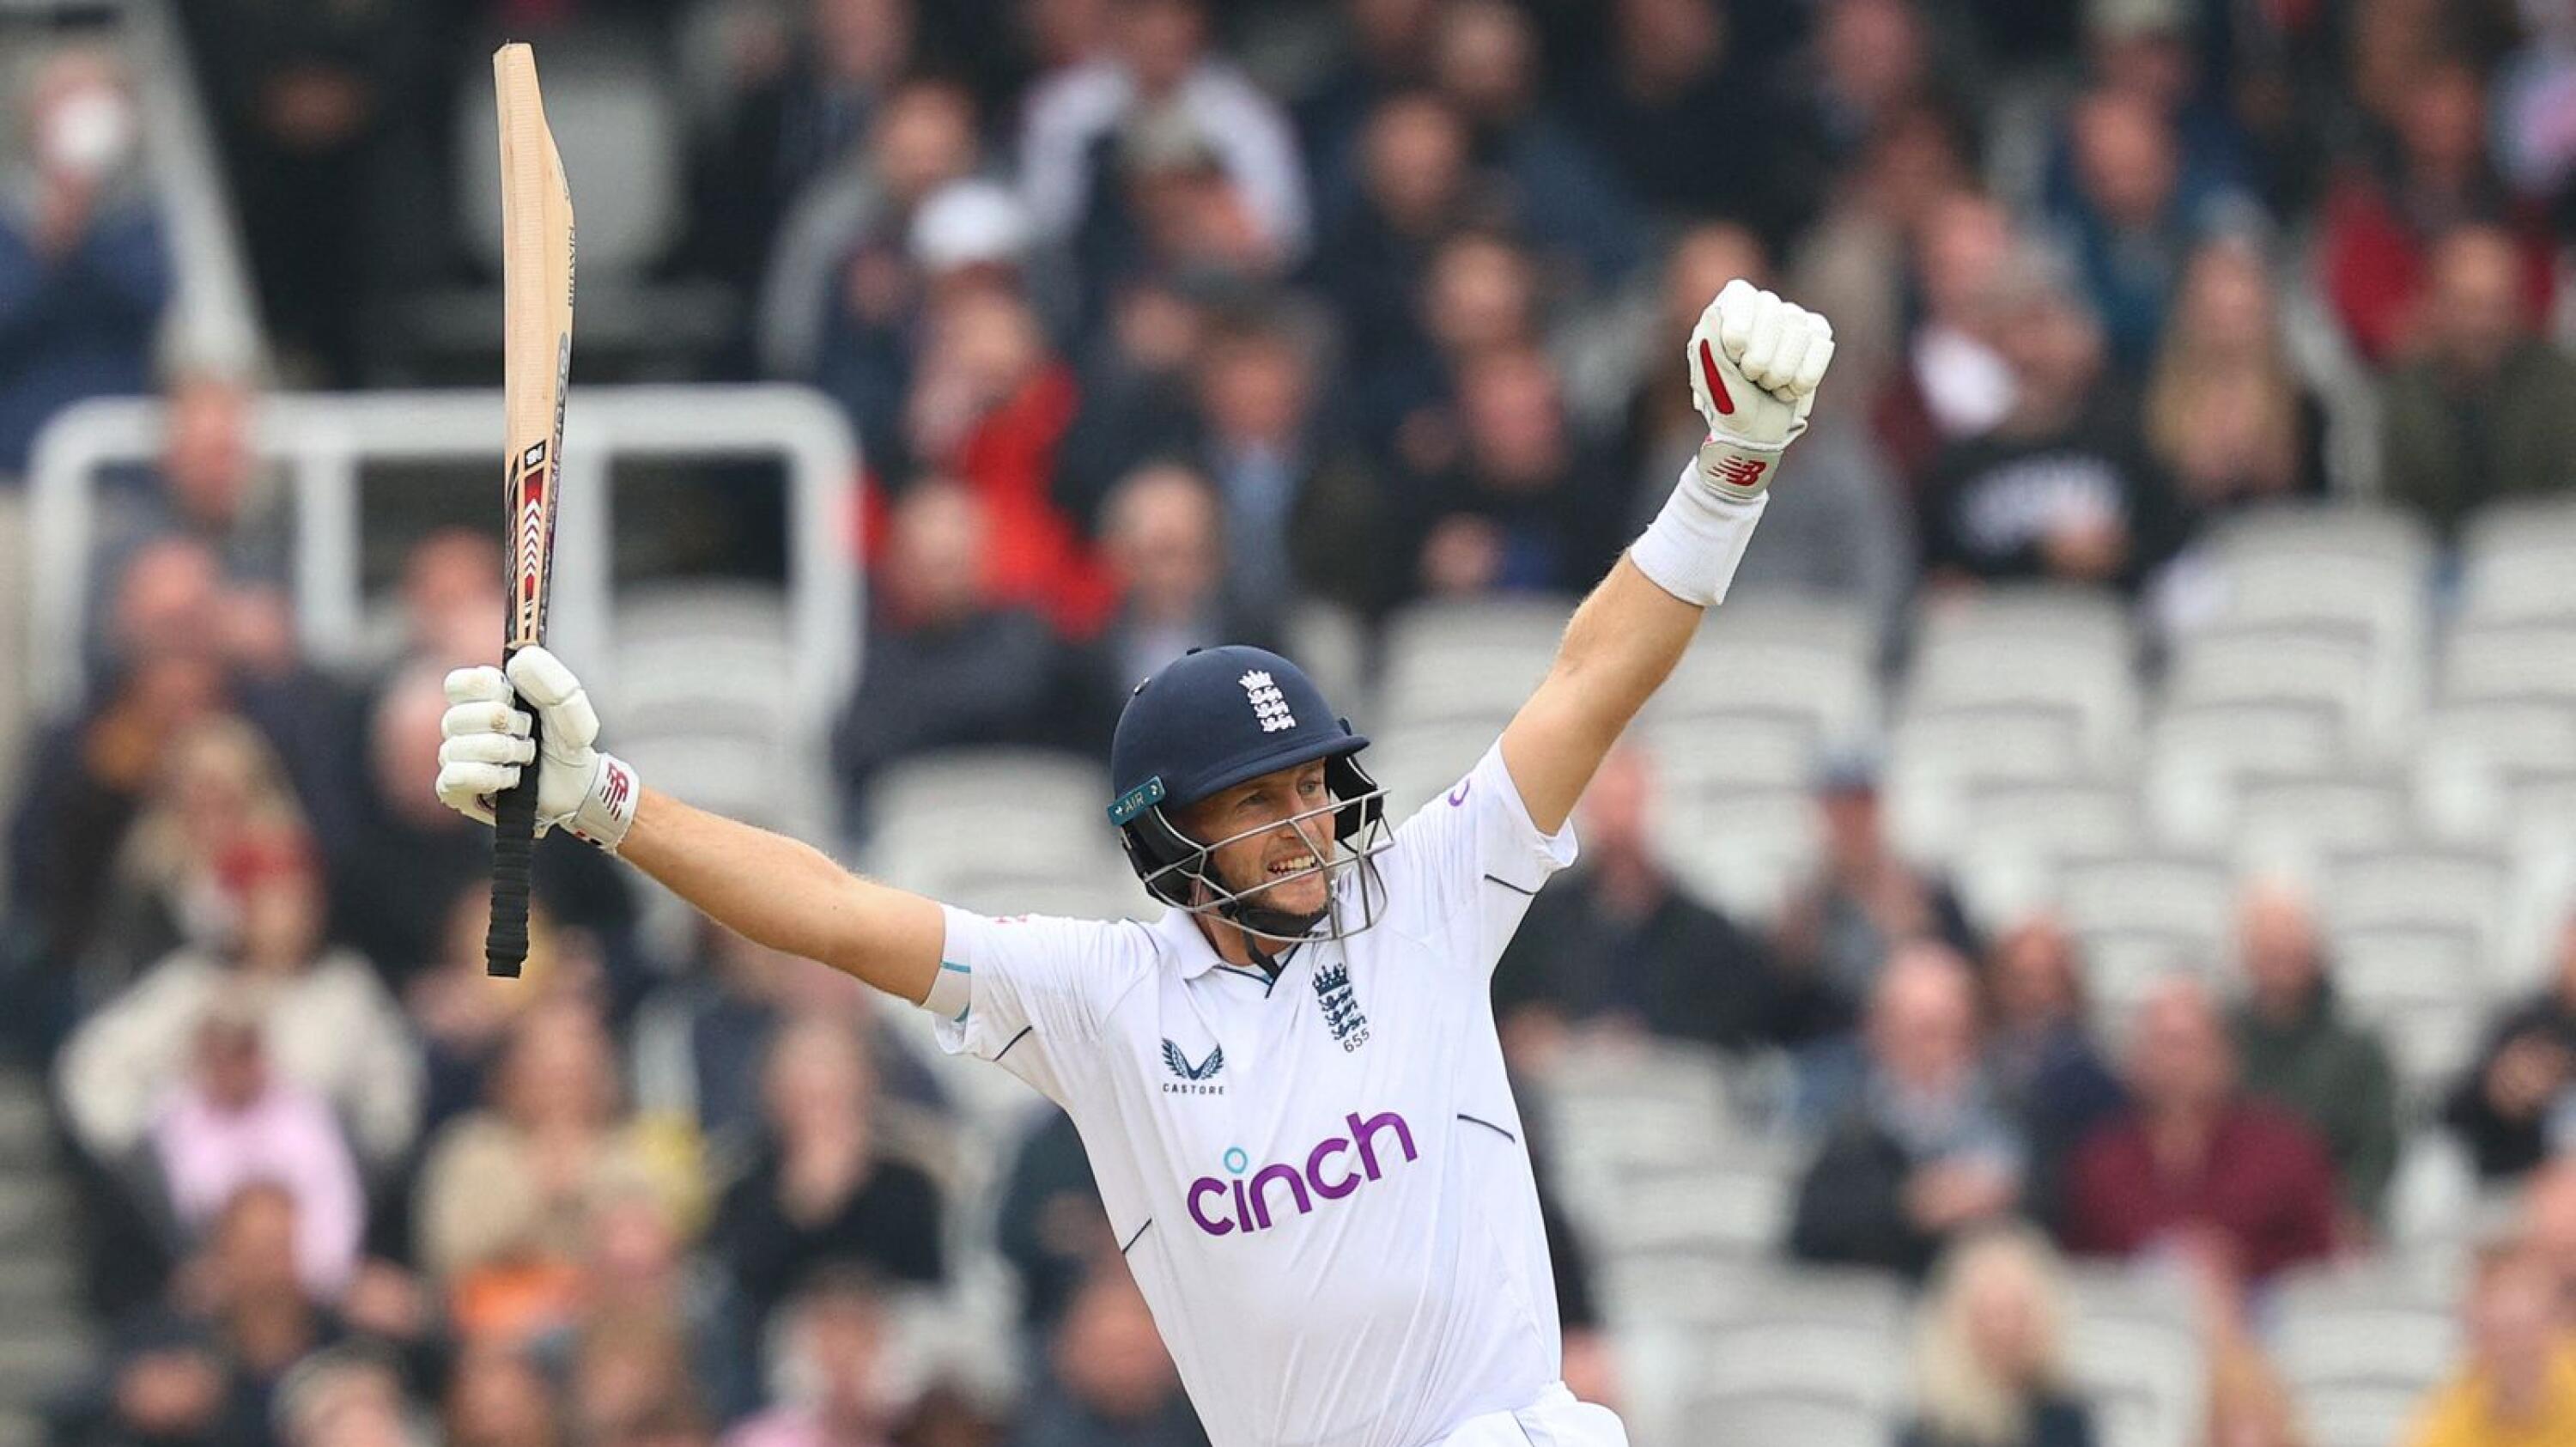 England's Joe Root celebrates scoring the winning runs on the fourth day of the first cricket Test match against New Zealand at Lord's cricket ground in London on Sunday